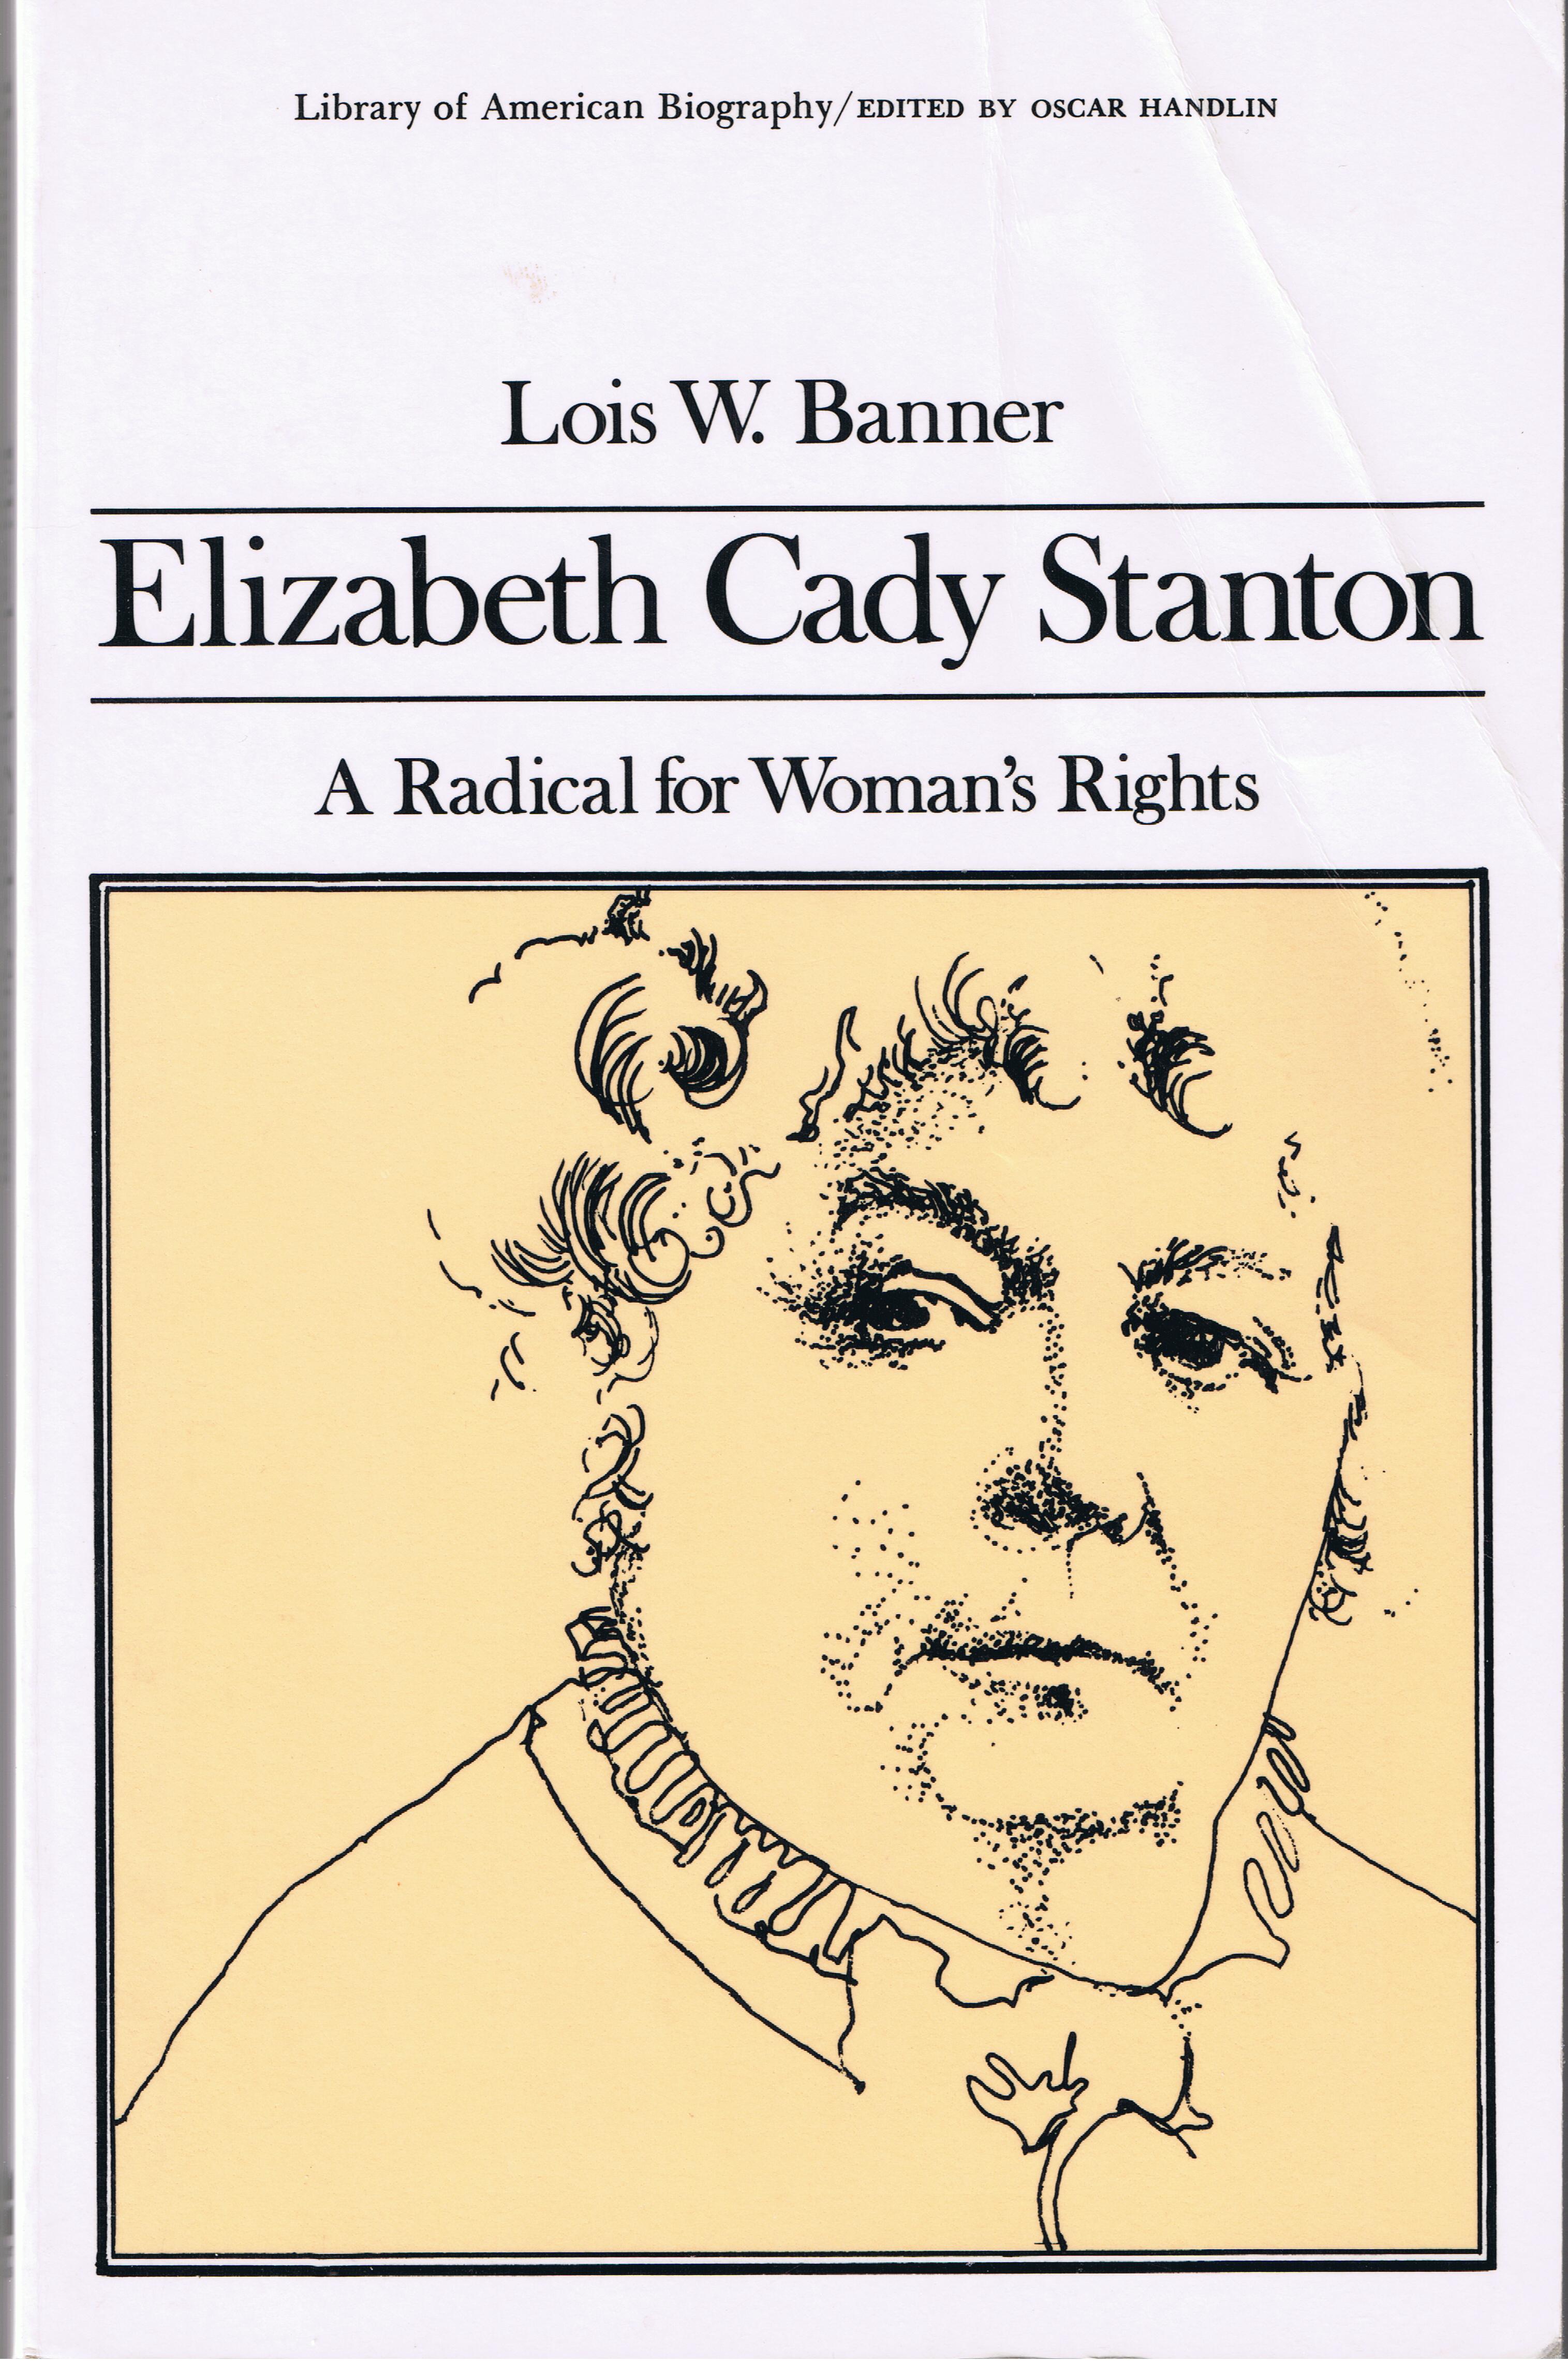 Elizabeth Cady Stanton, a radical for woman's rights